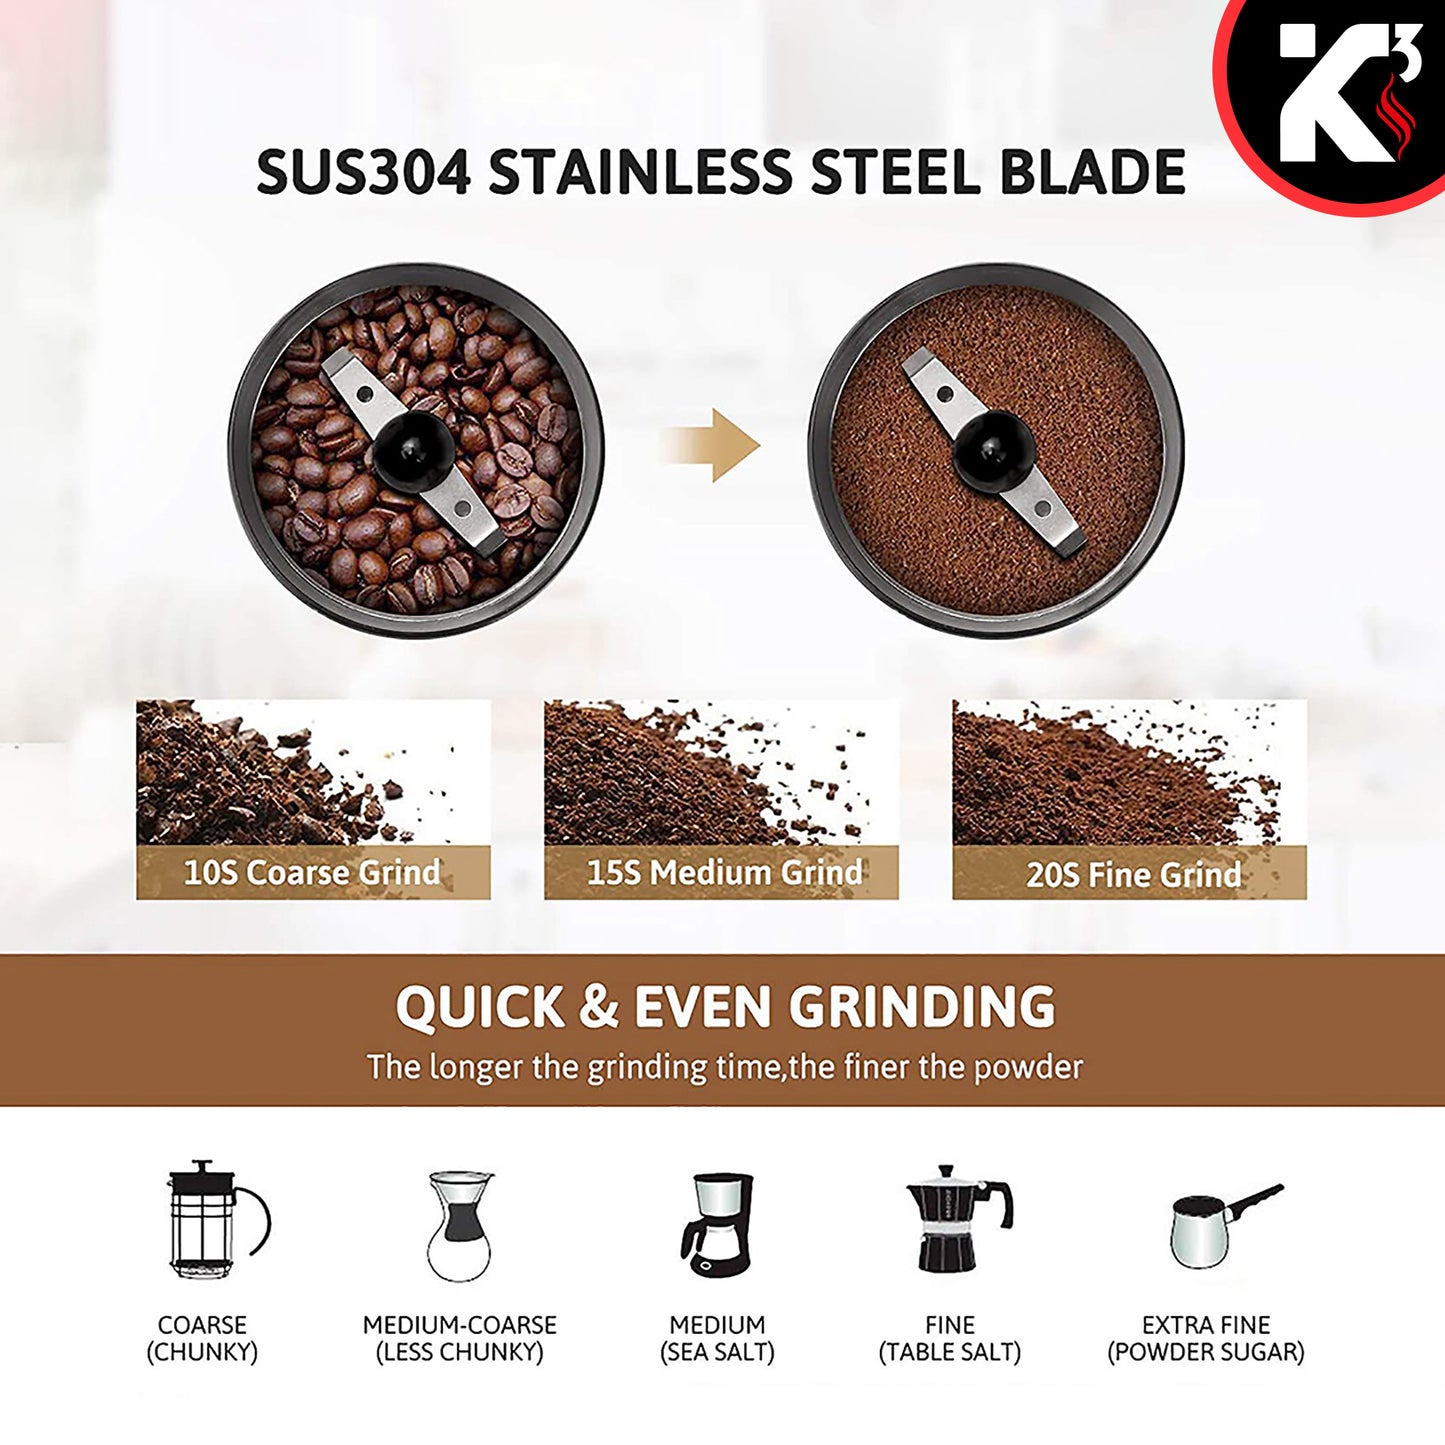 One-Touch Coffee and Spice Grinder Black|  Stainless Steel Blades, Removable Chamber| Capacity up to 12 Cups| Electric Coffee Grinder for Beans, Spices, and More- CG 01 BL